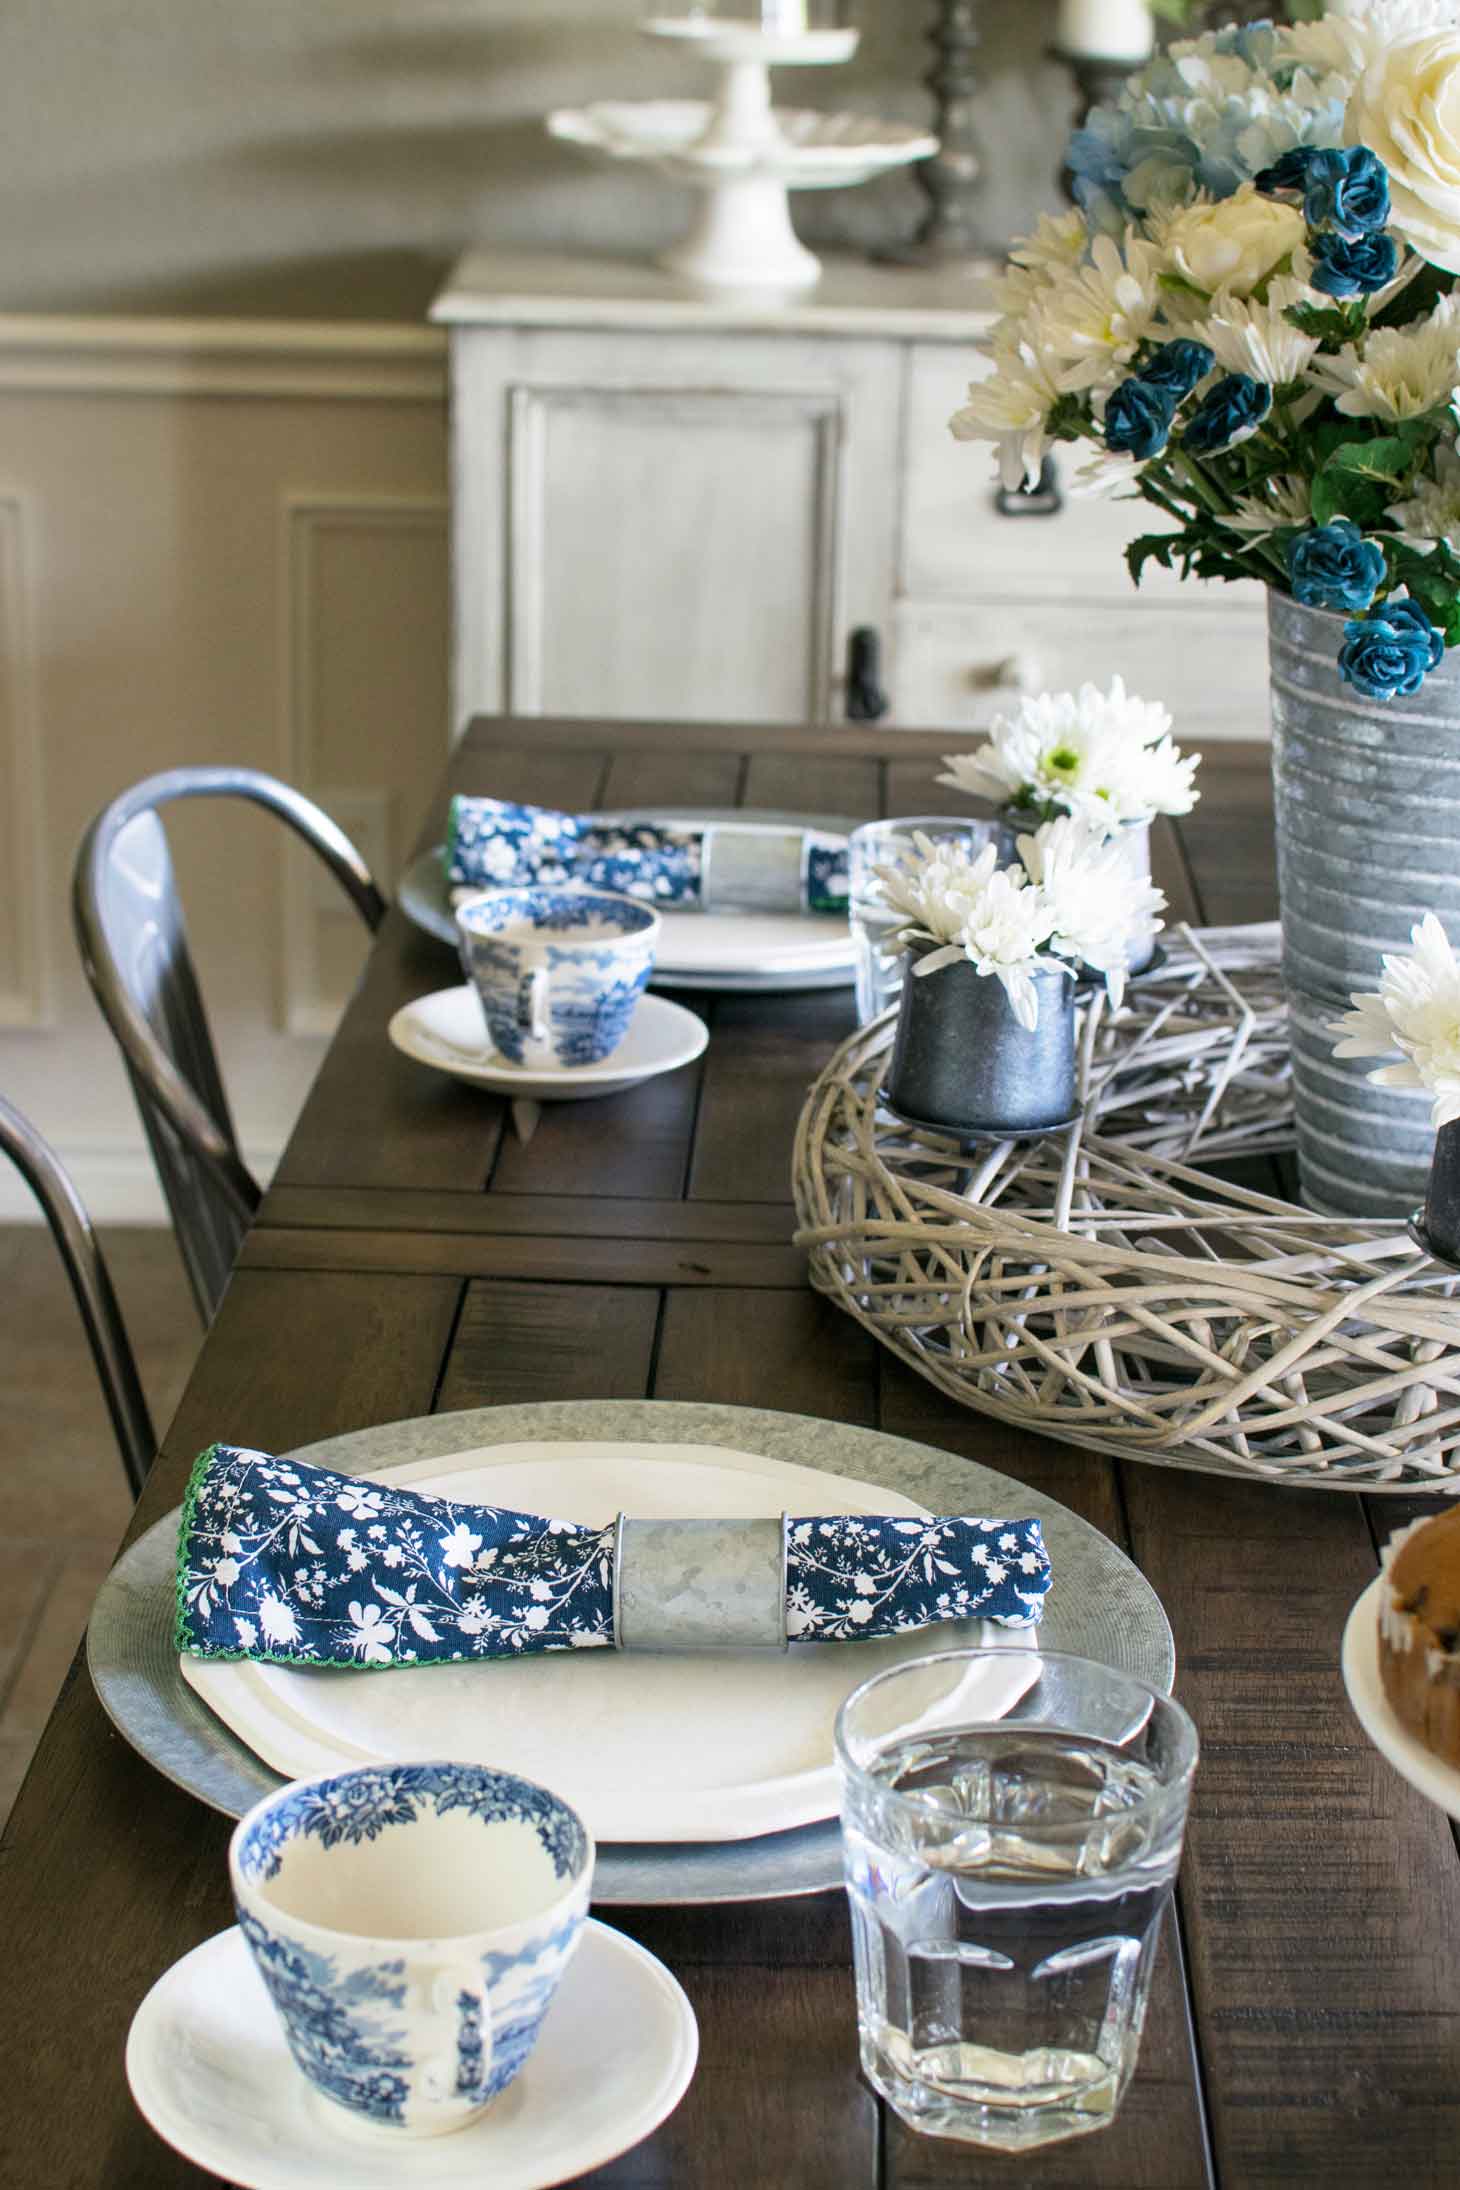 blue and white antique pottery makes a pretty spring table setting